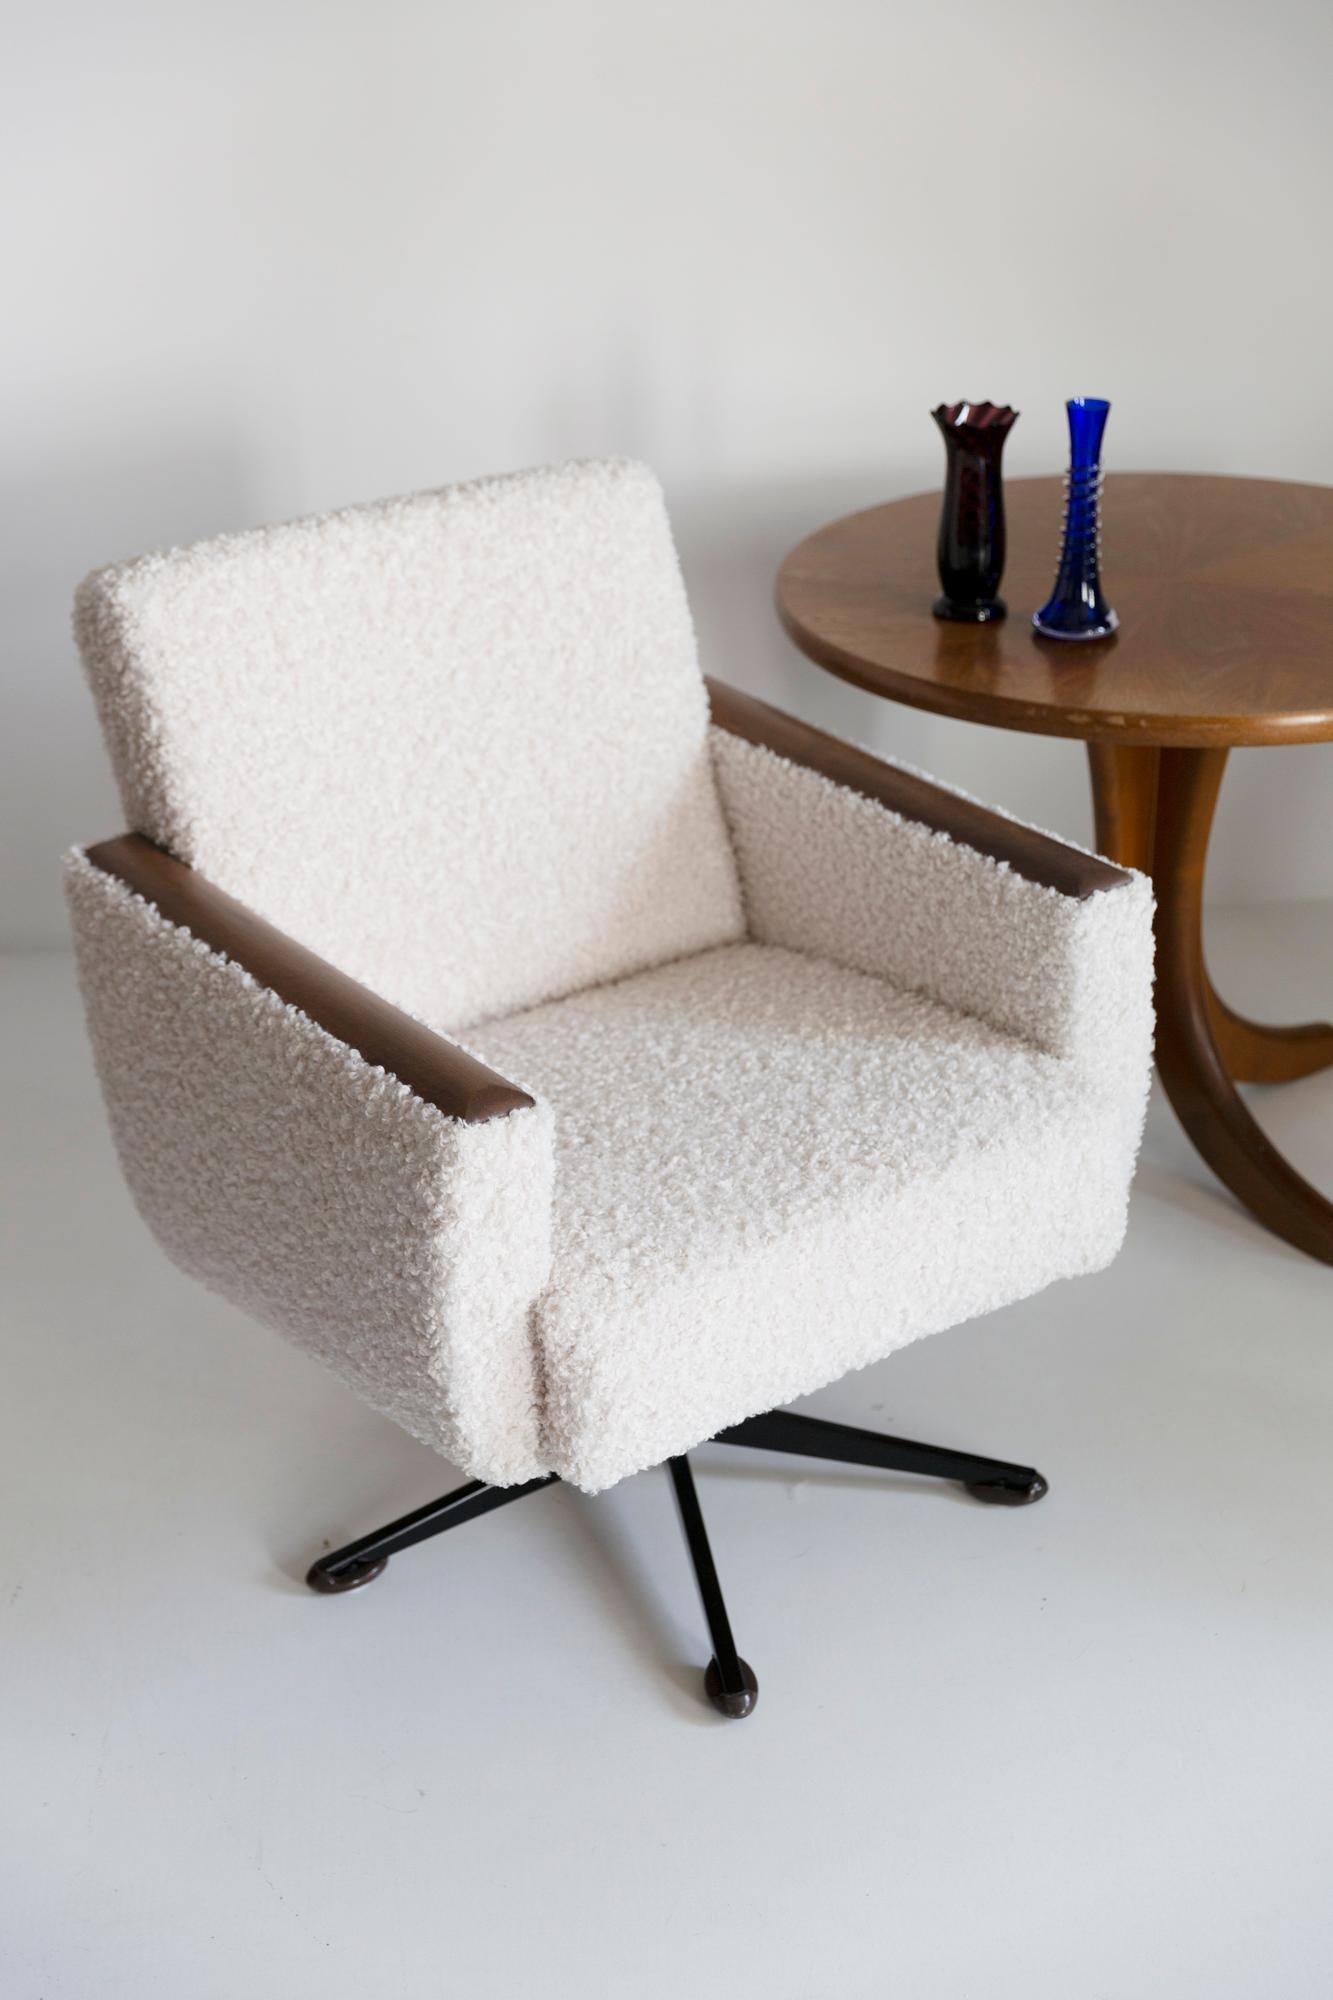 Amazing swivel armchair from the 1960s, produced in the Silesian furniture factory in Swiebodzin - at the moment they are unique. Very comfortable. Due to their dimensions, they perfectly blend in even in small apartments providing comfort and